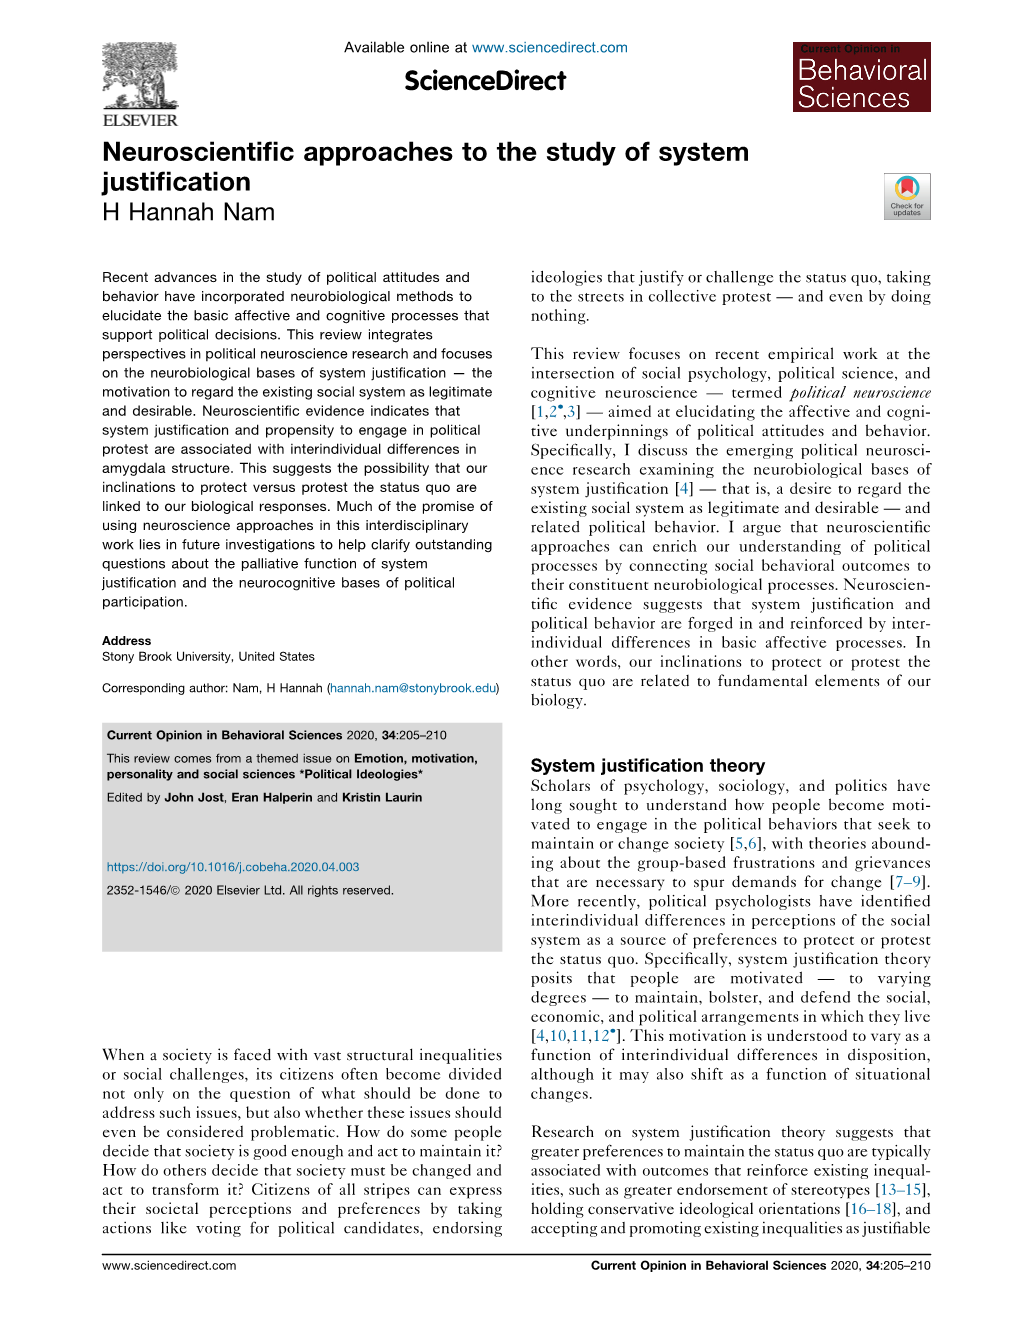 Neuroscientific Approaches to the Study of System Justification